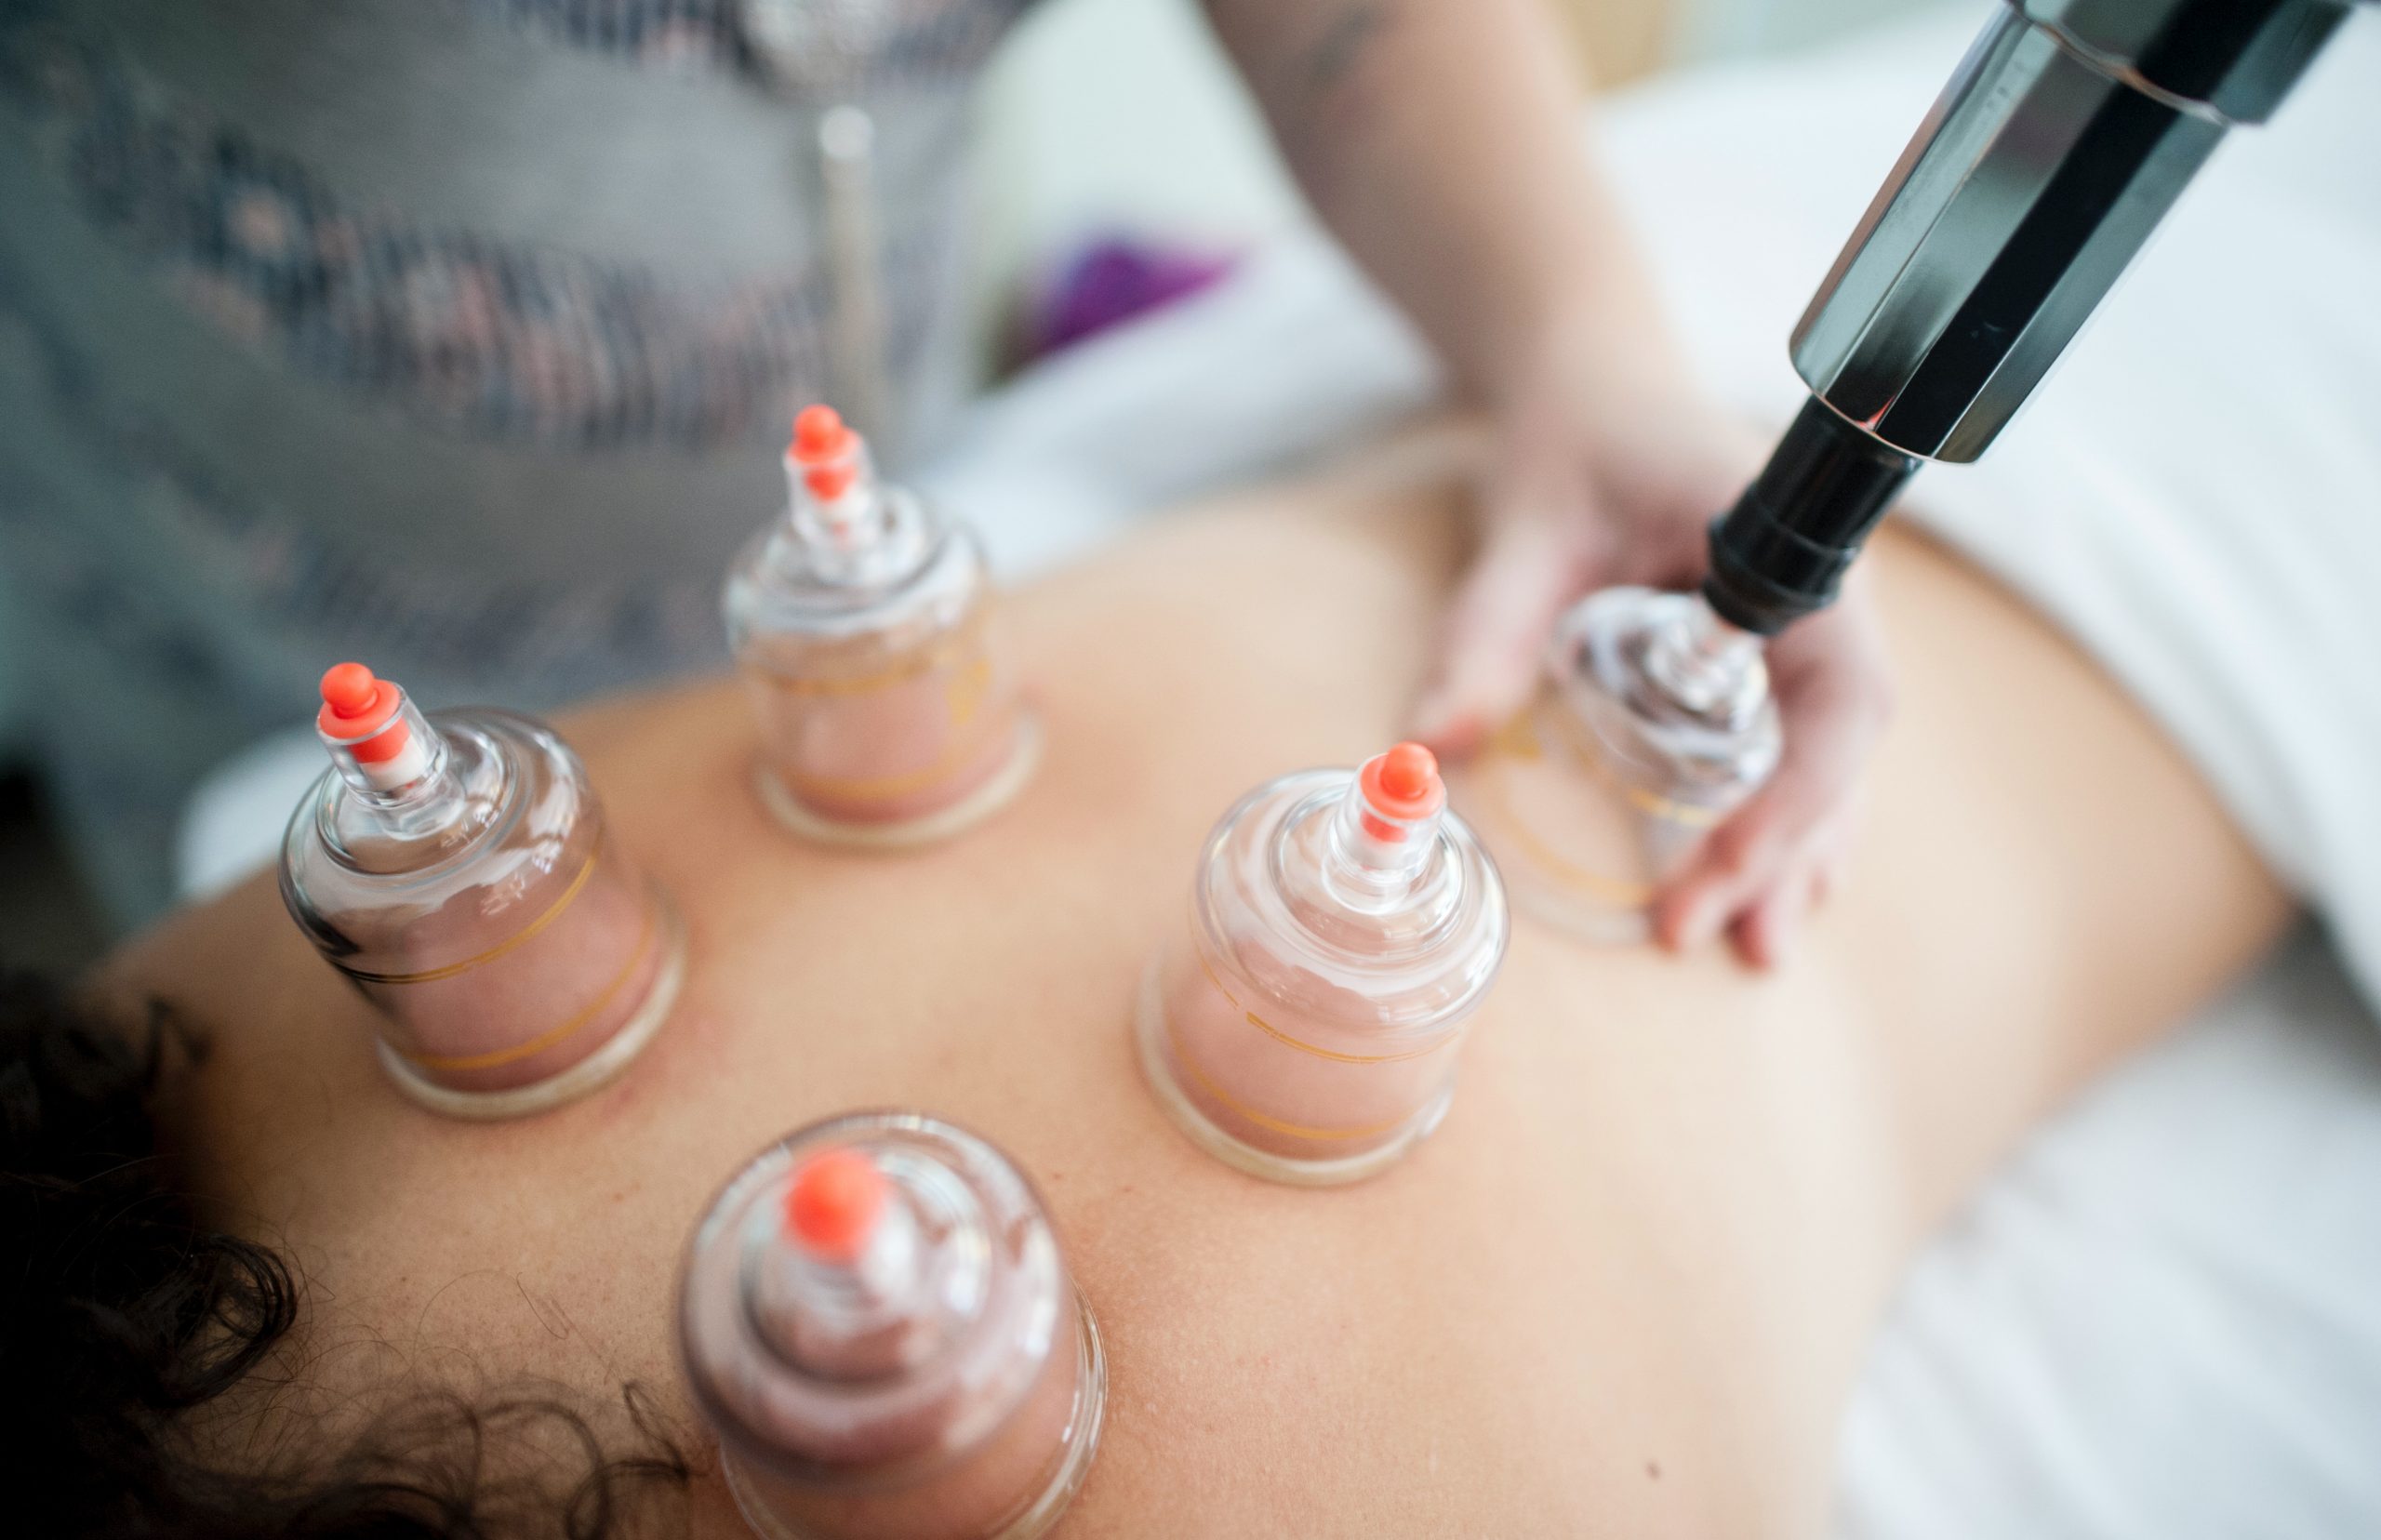 Close up image of a therapist peforming cupping therapy Queens NY on someone's back